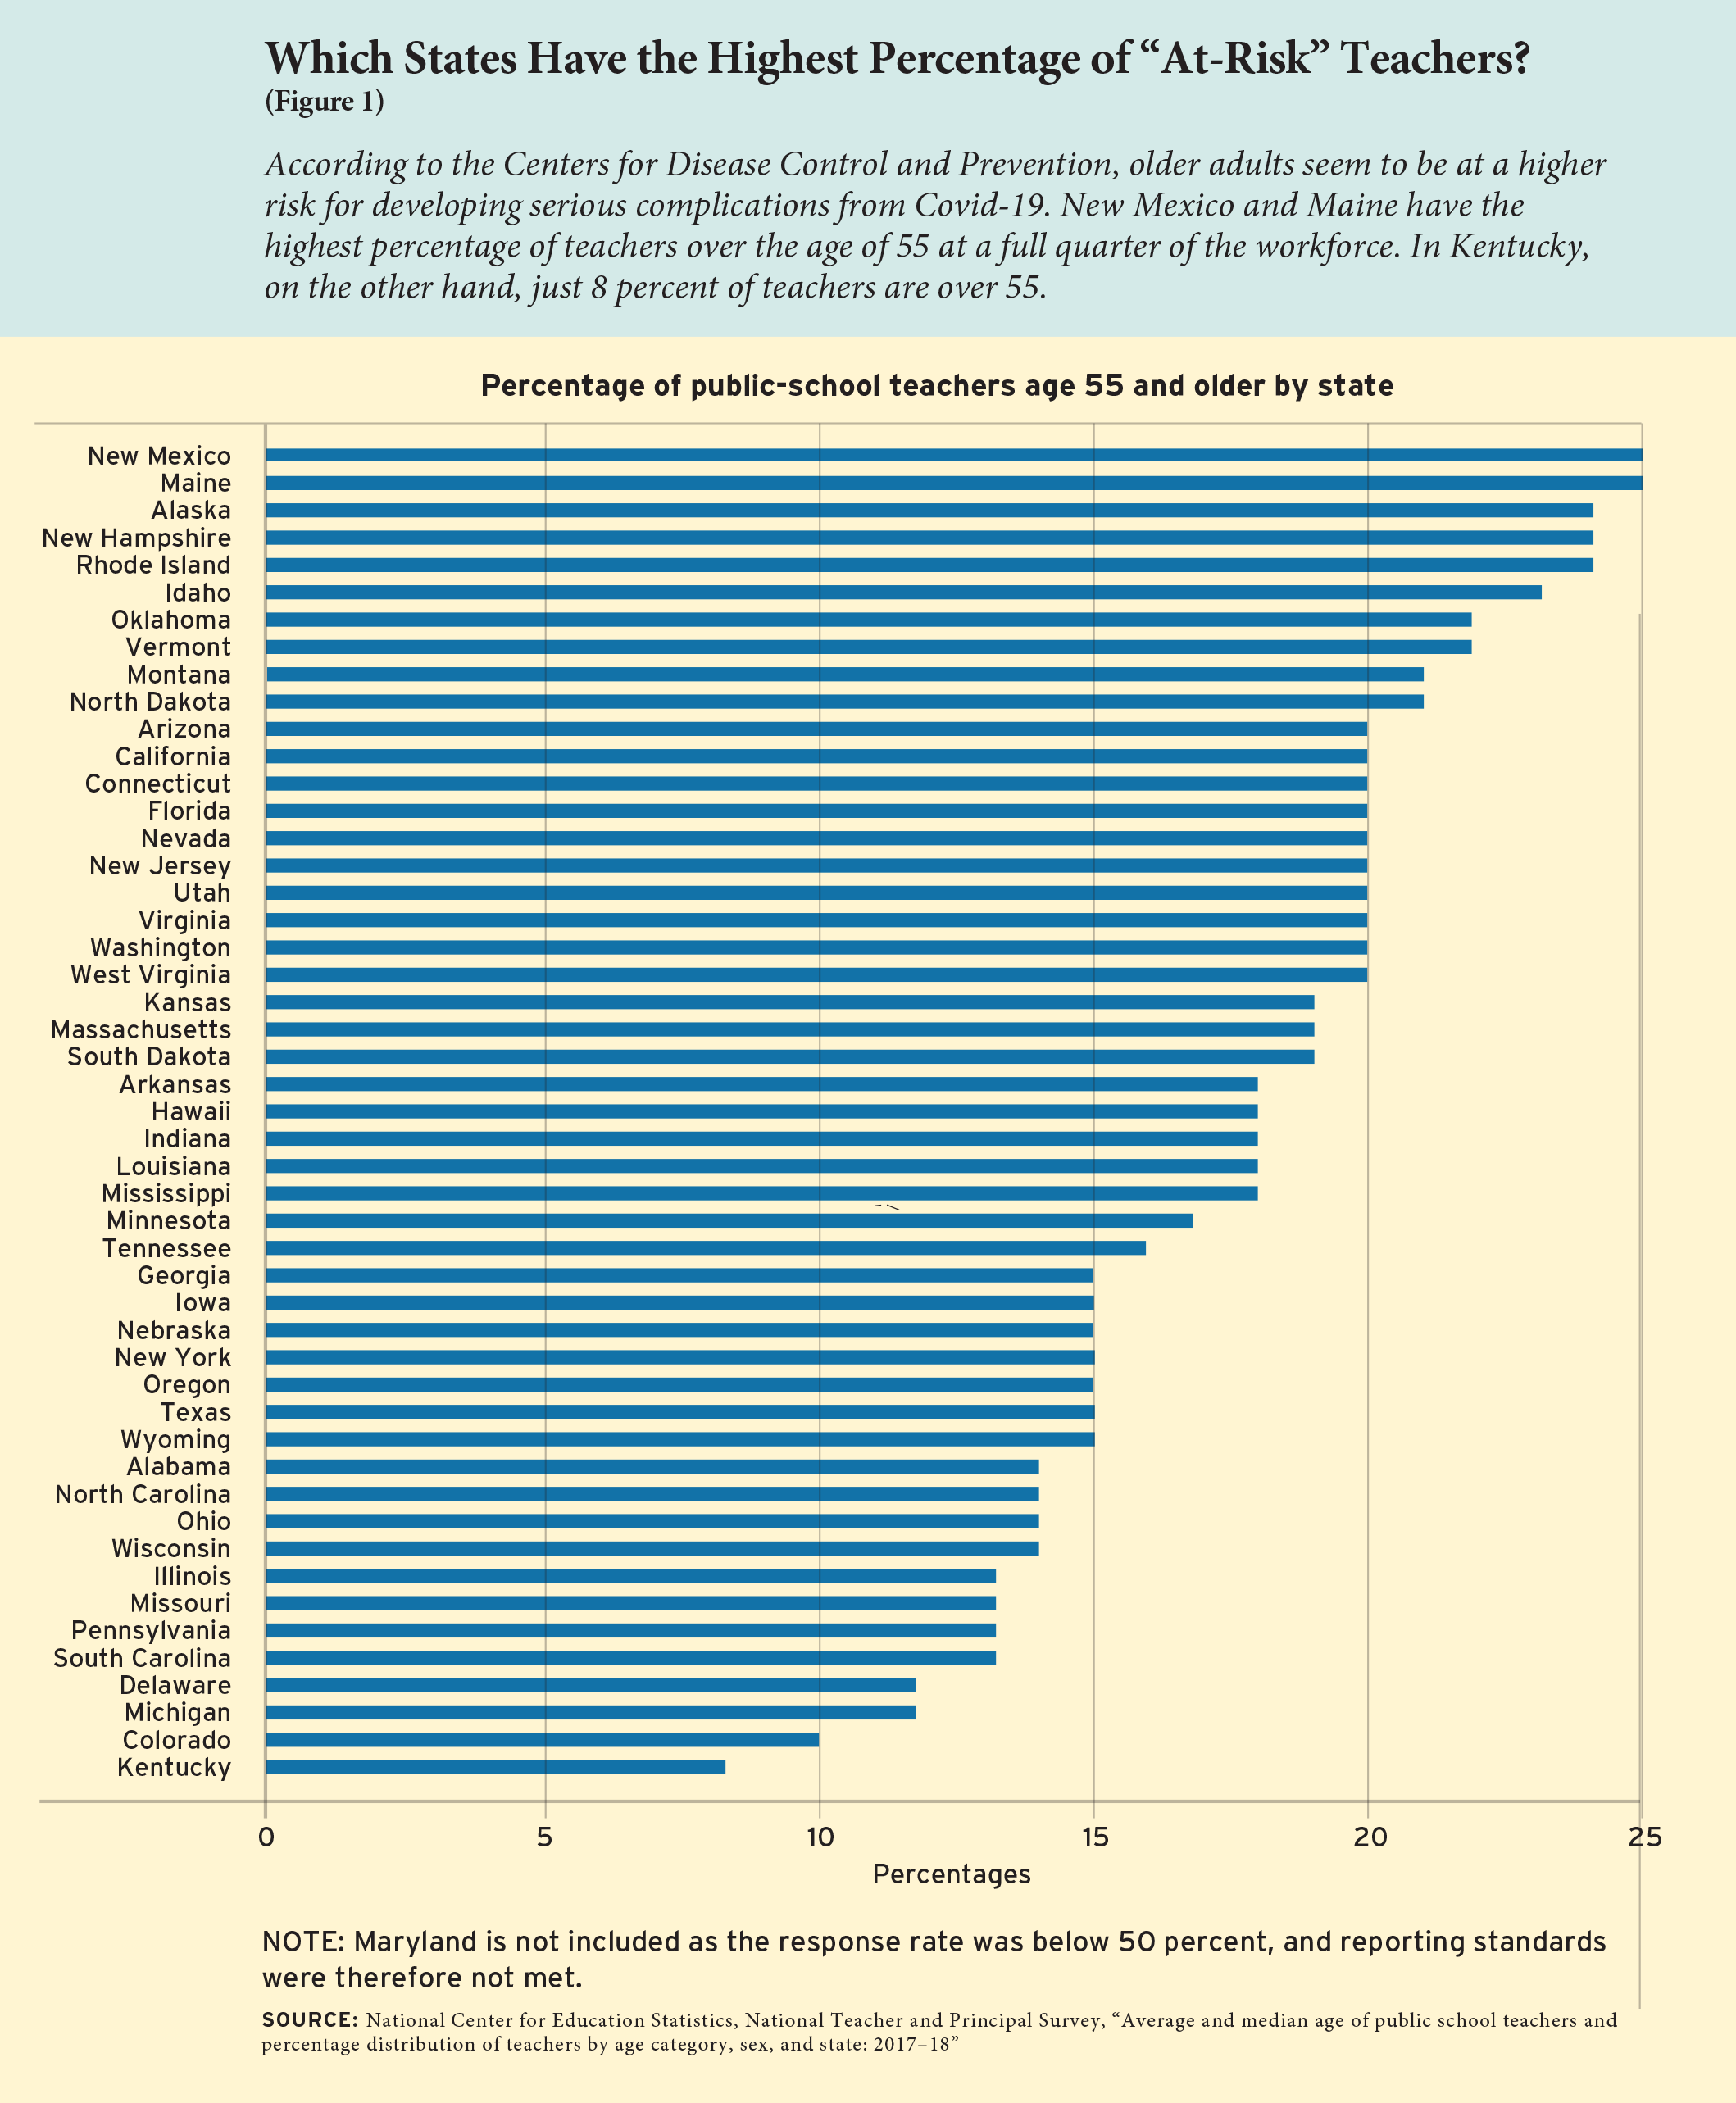 Figure 1: Which States Have the Highest Percentage of “At-Risk” Teachers?